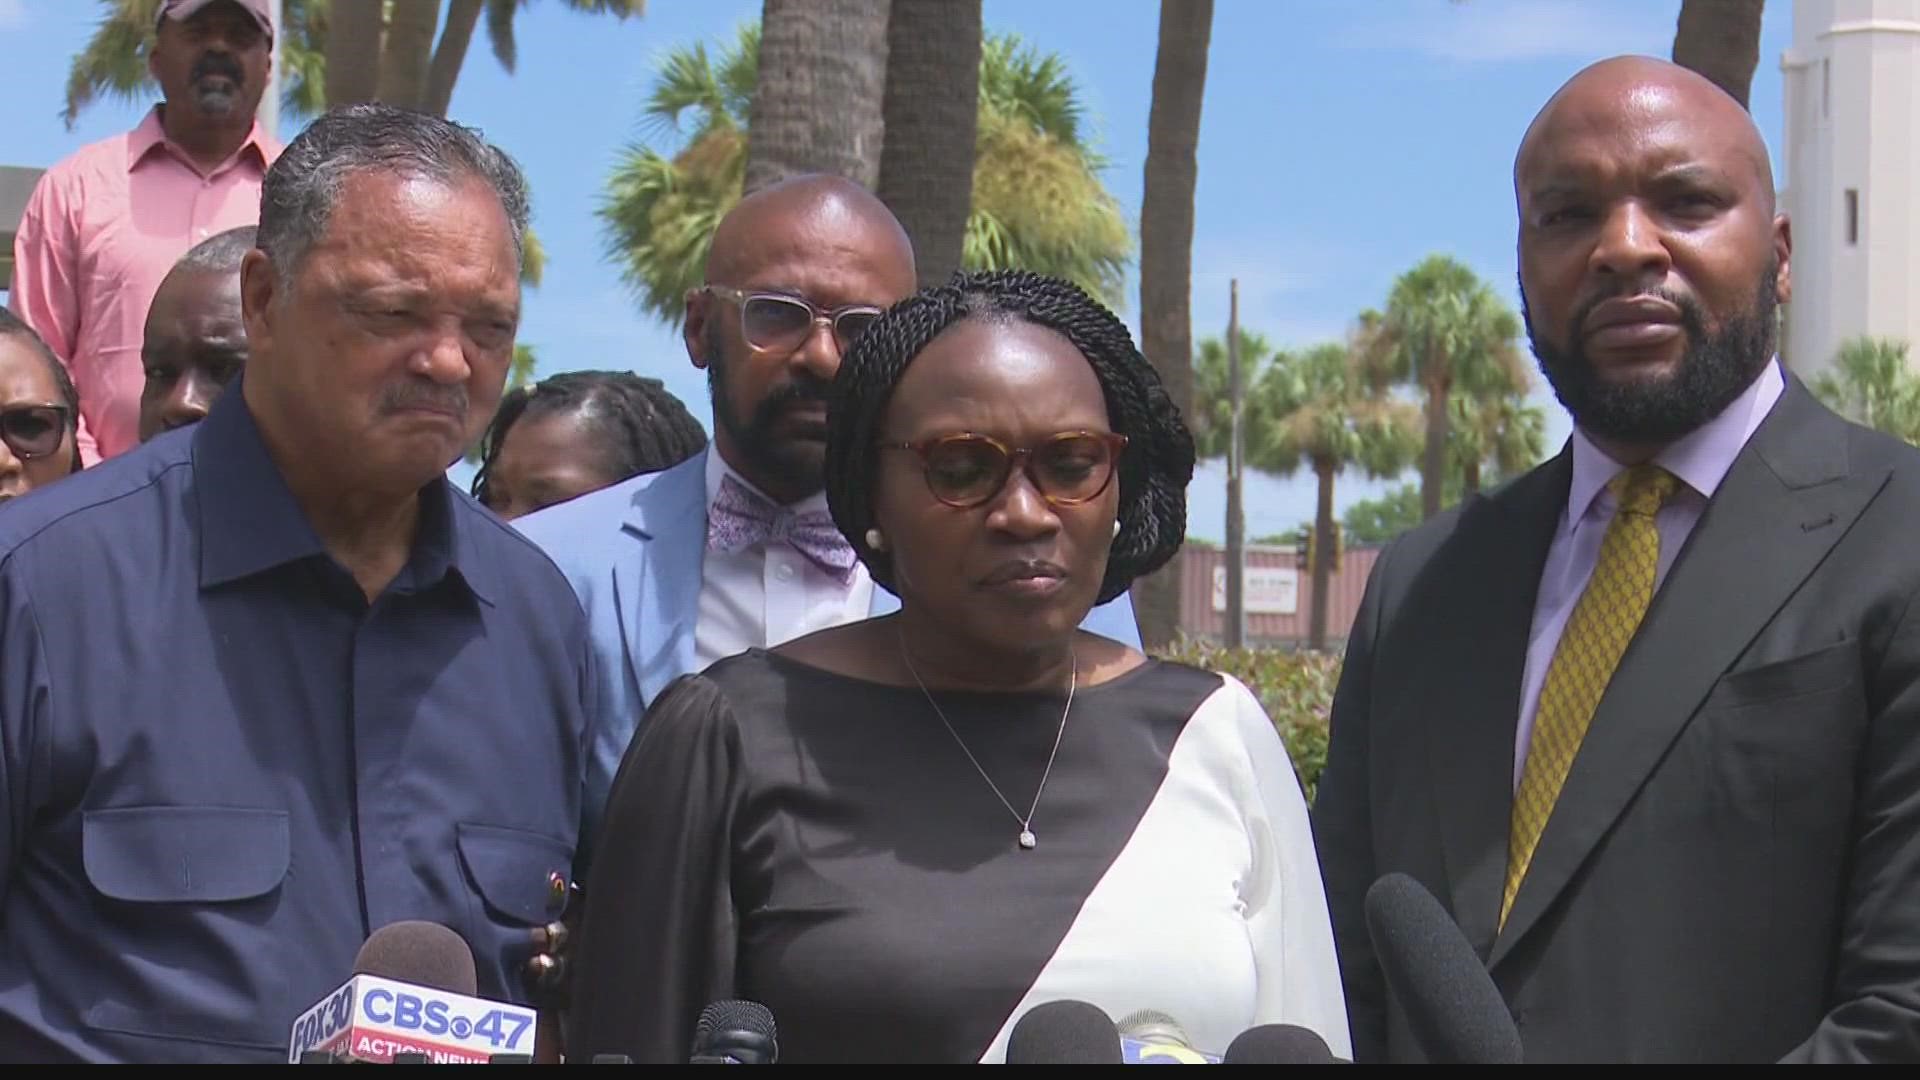 Wanda Cooper-Jones says that she accepted the apology of Greg McMichael.